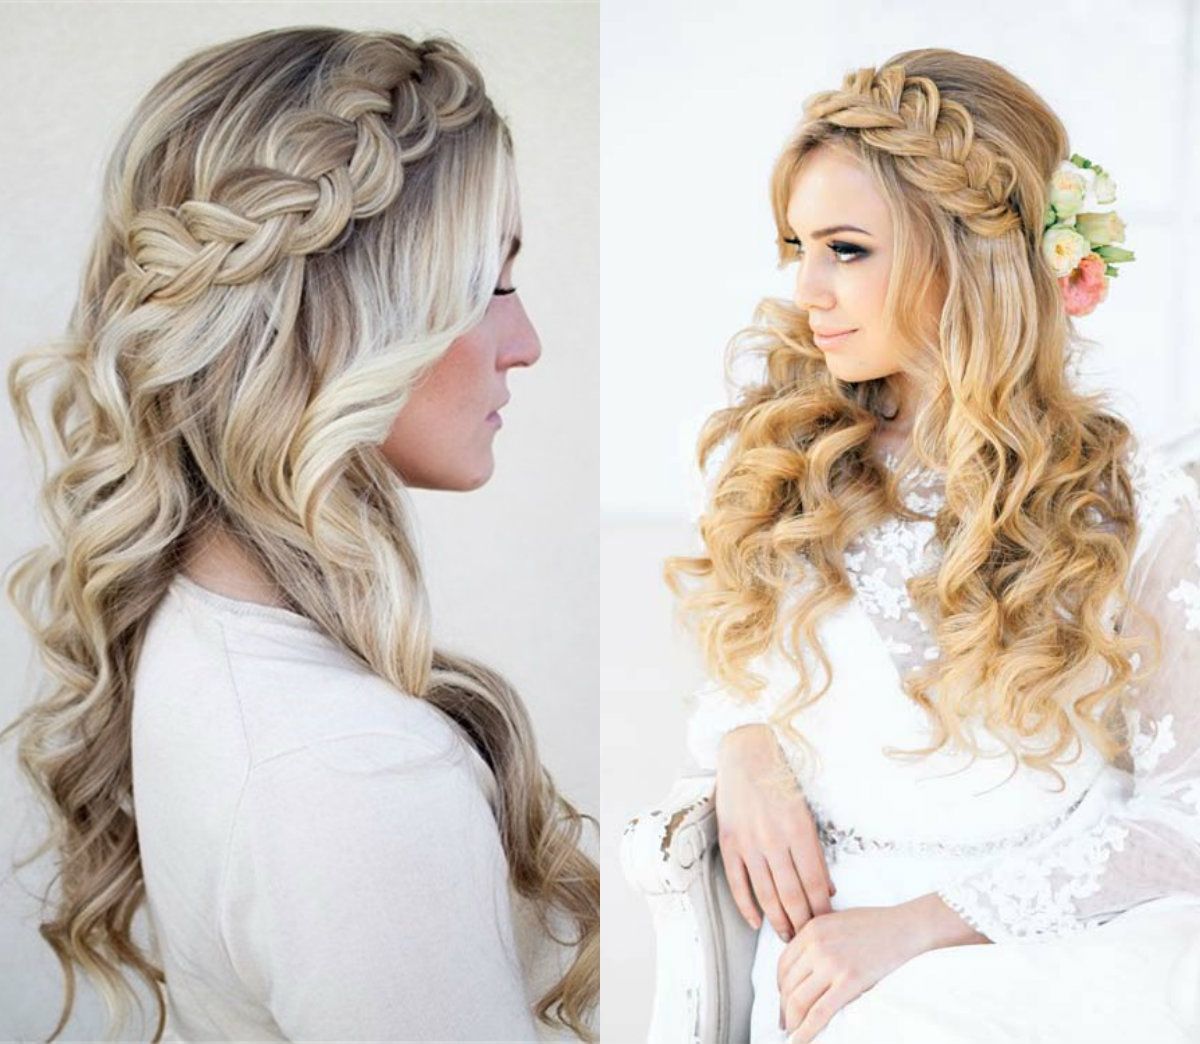 Perfect Wedding Hairstyles Down With Flower 86 For Inspirational Throughout Most Recently Released Floral Crown Half Up Half Down Bridal Hairstyles (View 15 of 20)